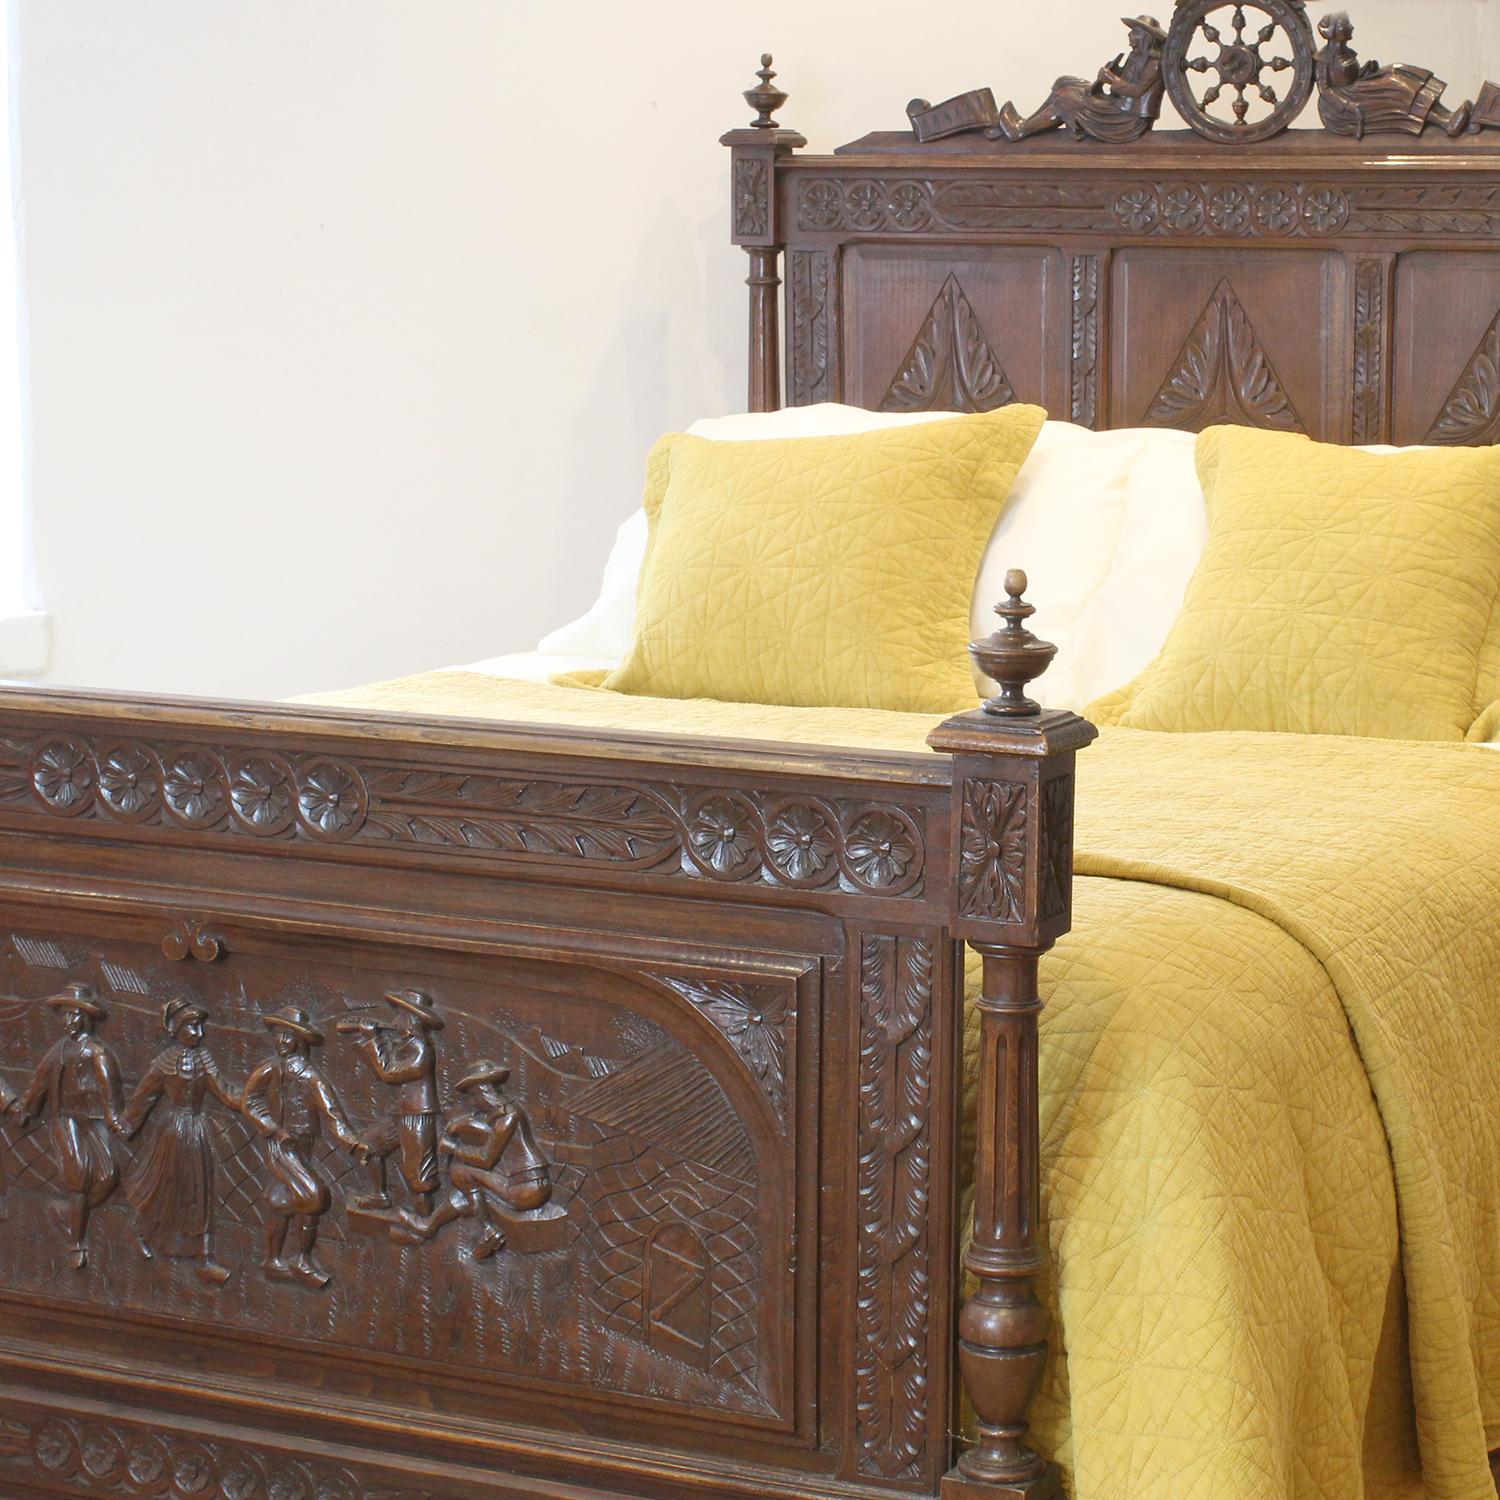 A superbly carved bed in oak with decoratively panels featuring dancing figures and musicians.

This bed accepts a British king size or American queen size, 5ft wide (60 inches or 150cm) base and mattress set, with an overlap (as shown)

The price